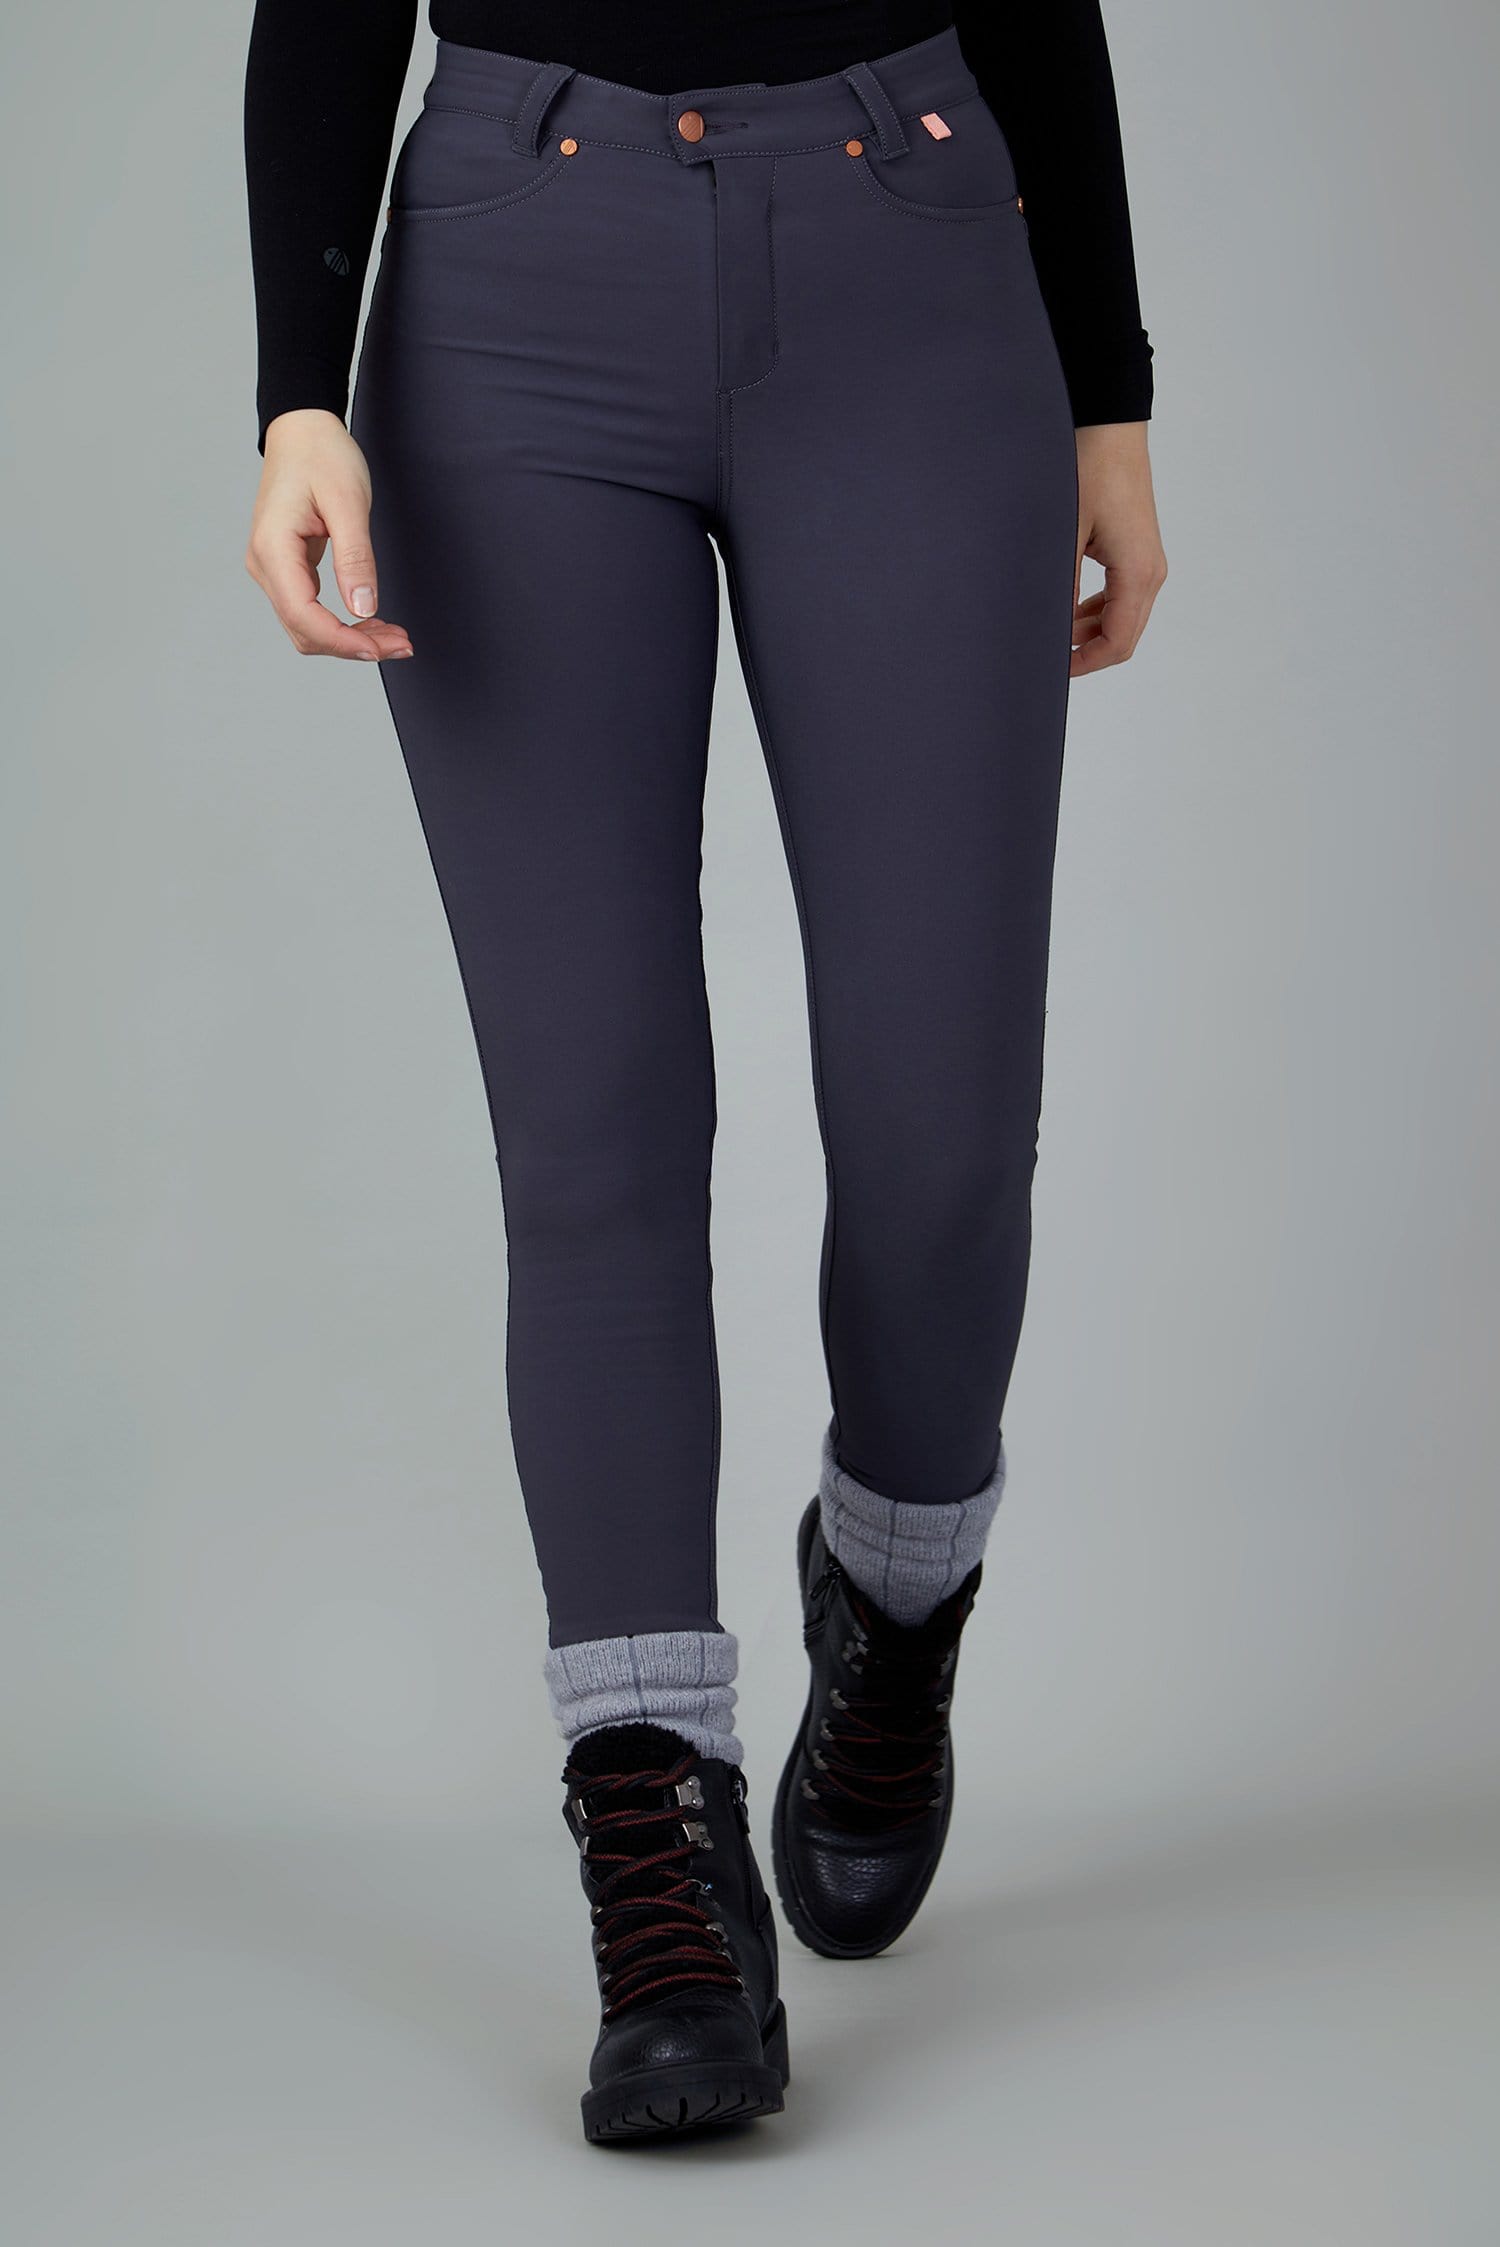 The Aventurite Stretch Skinny Outdoor Trousers - Obsidian - 34p / Uk16 - Womens - Acai Outdoorwear